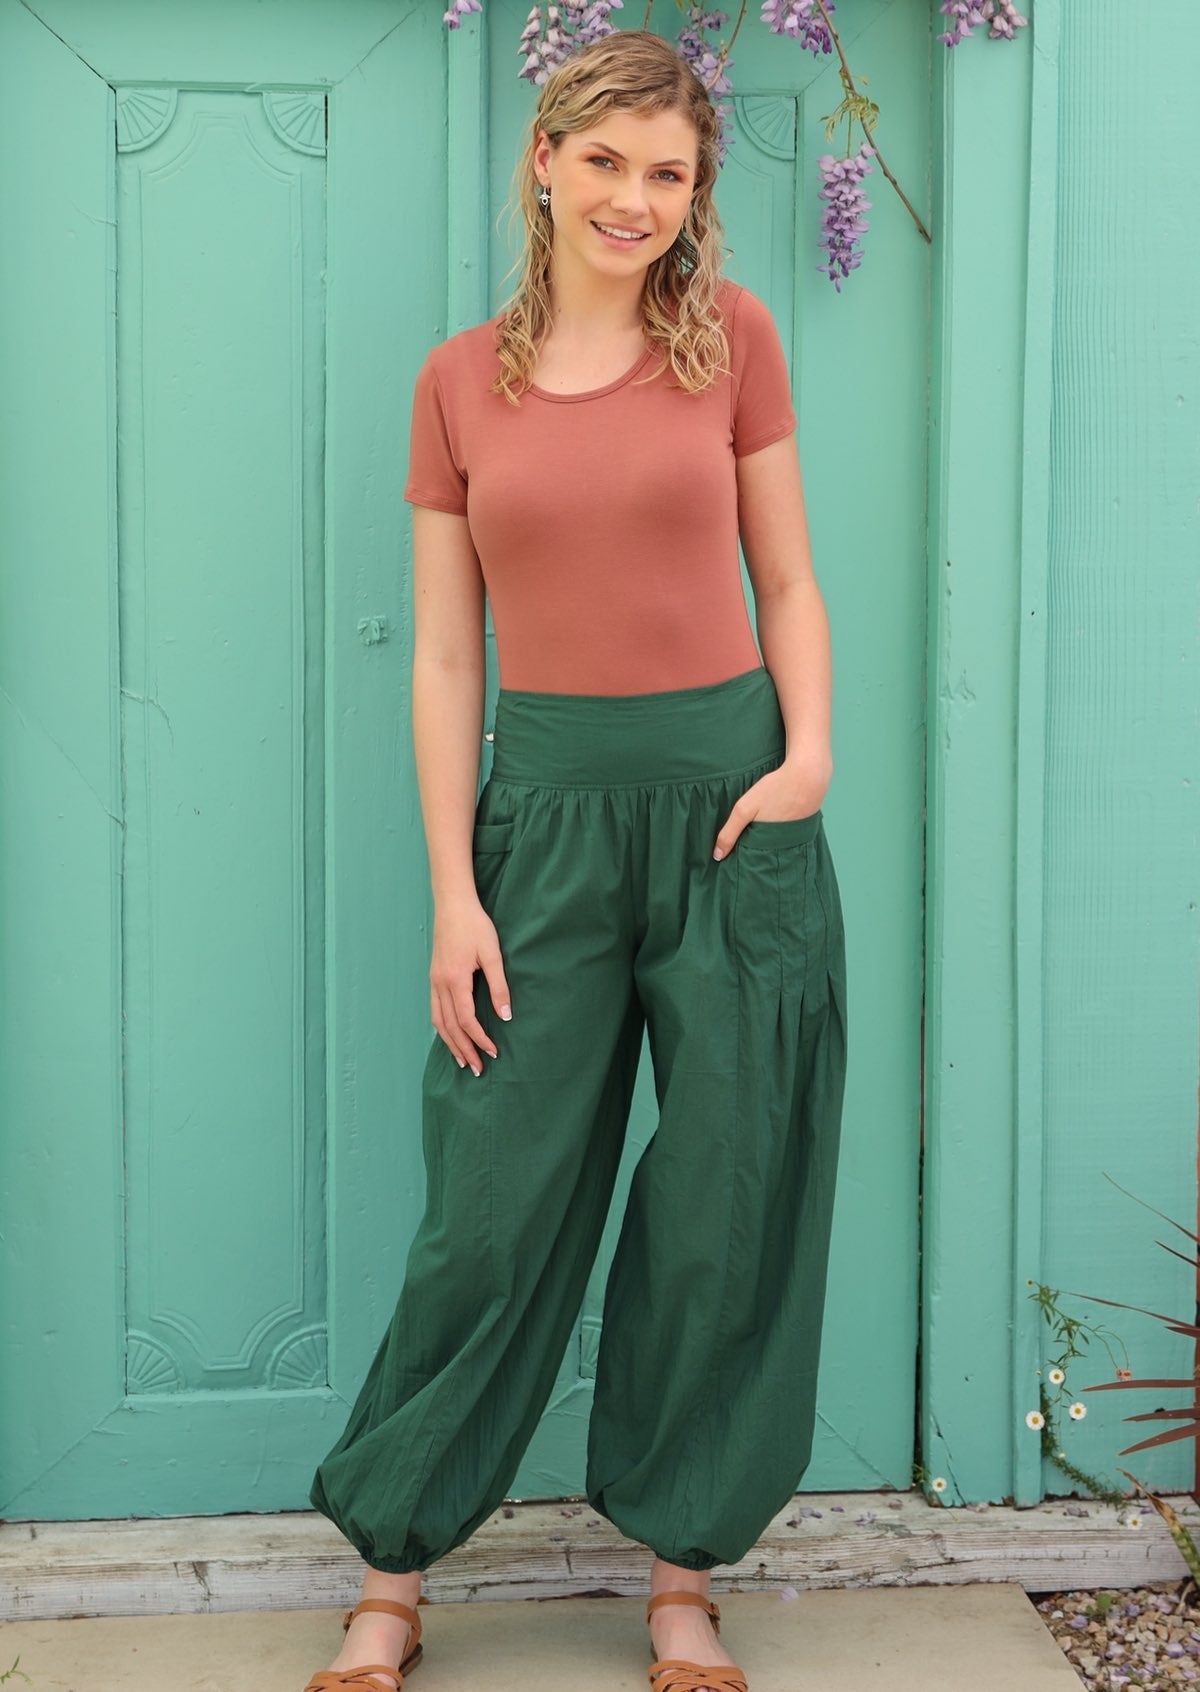 Woman has her hand in the pocket of her green pants with an elasticated waist. 